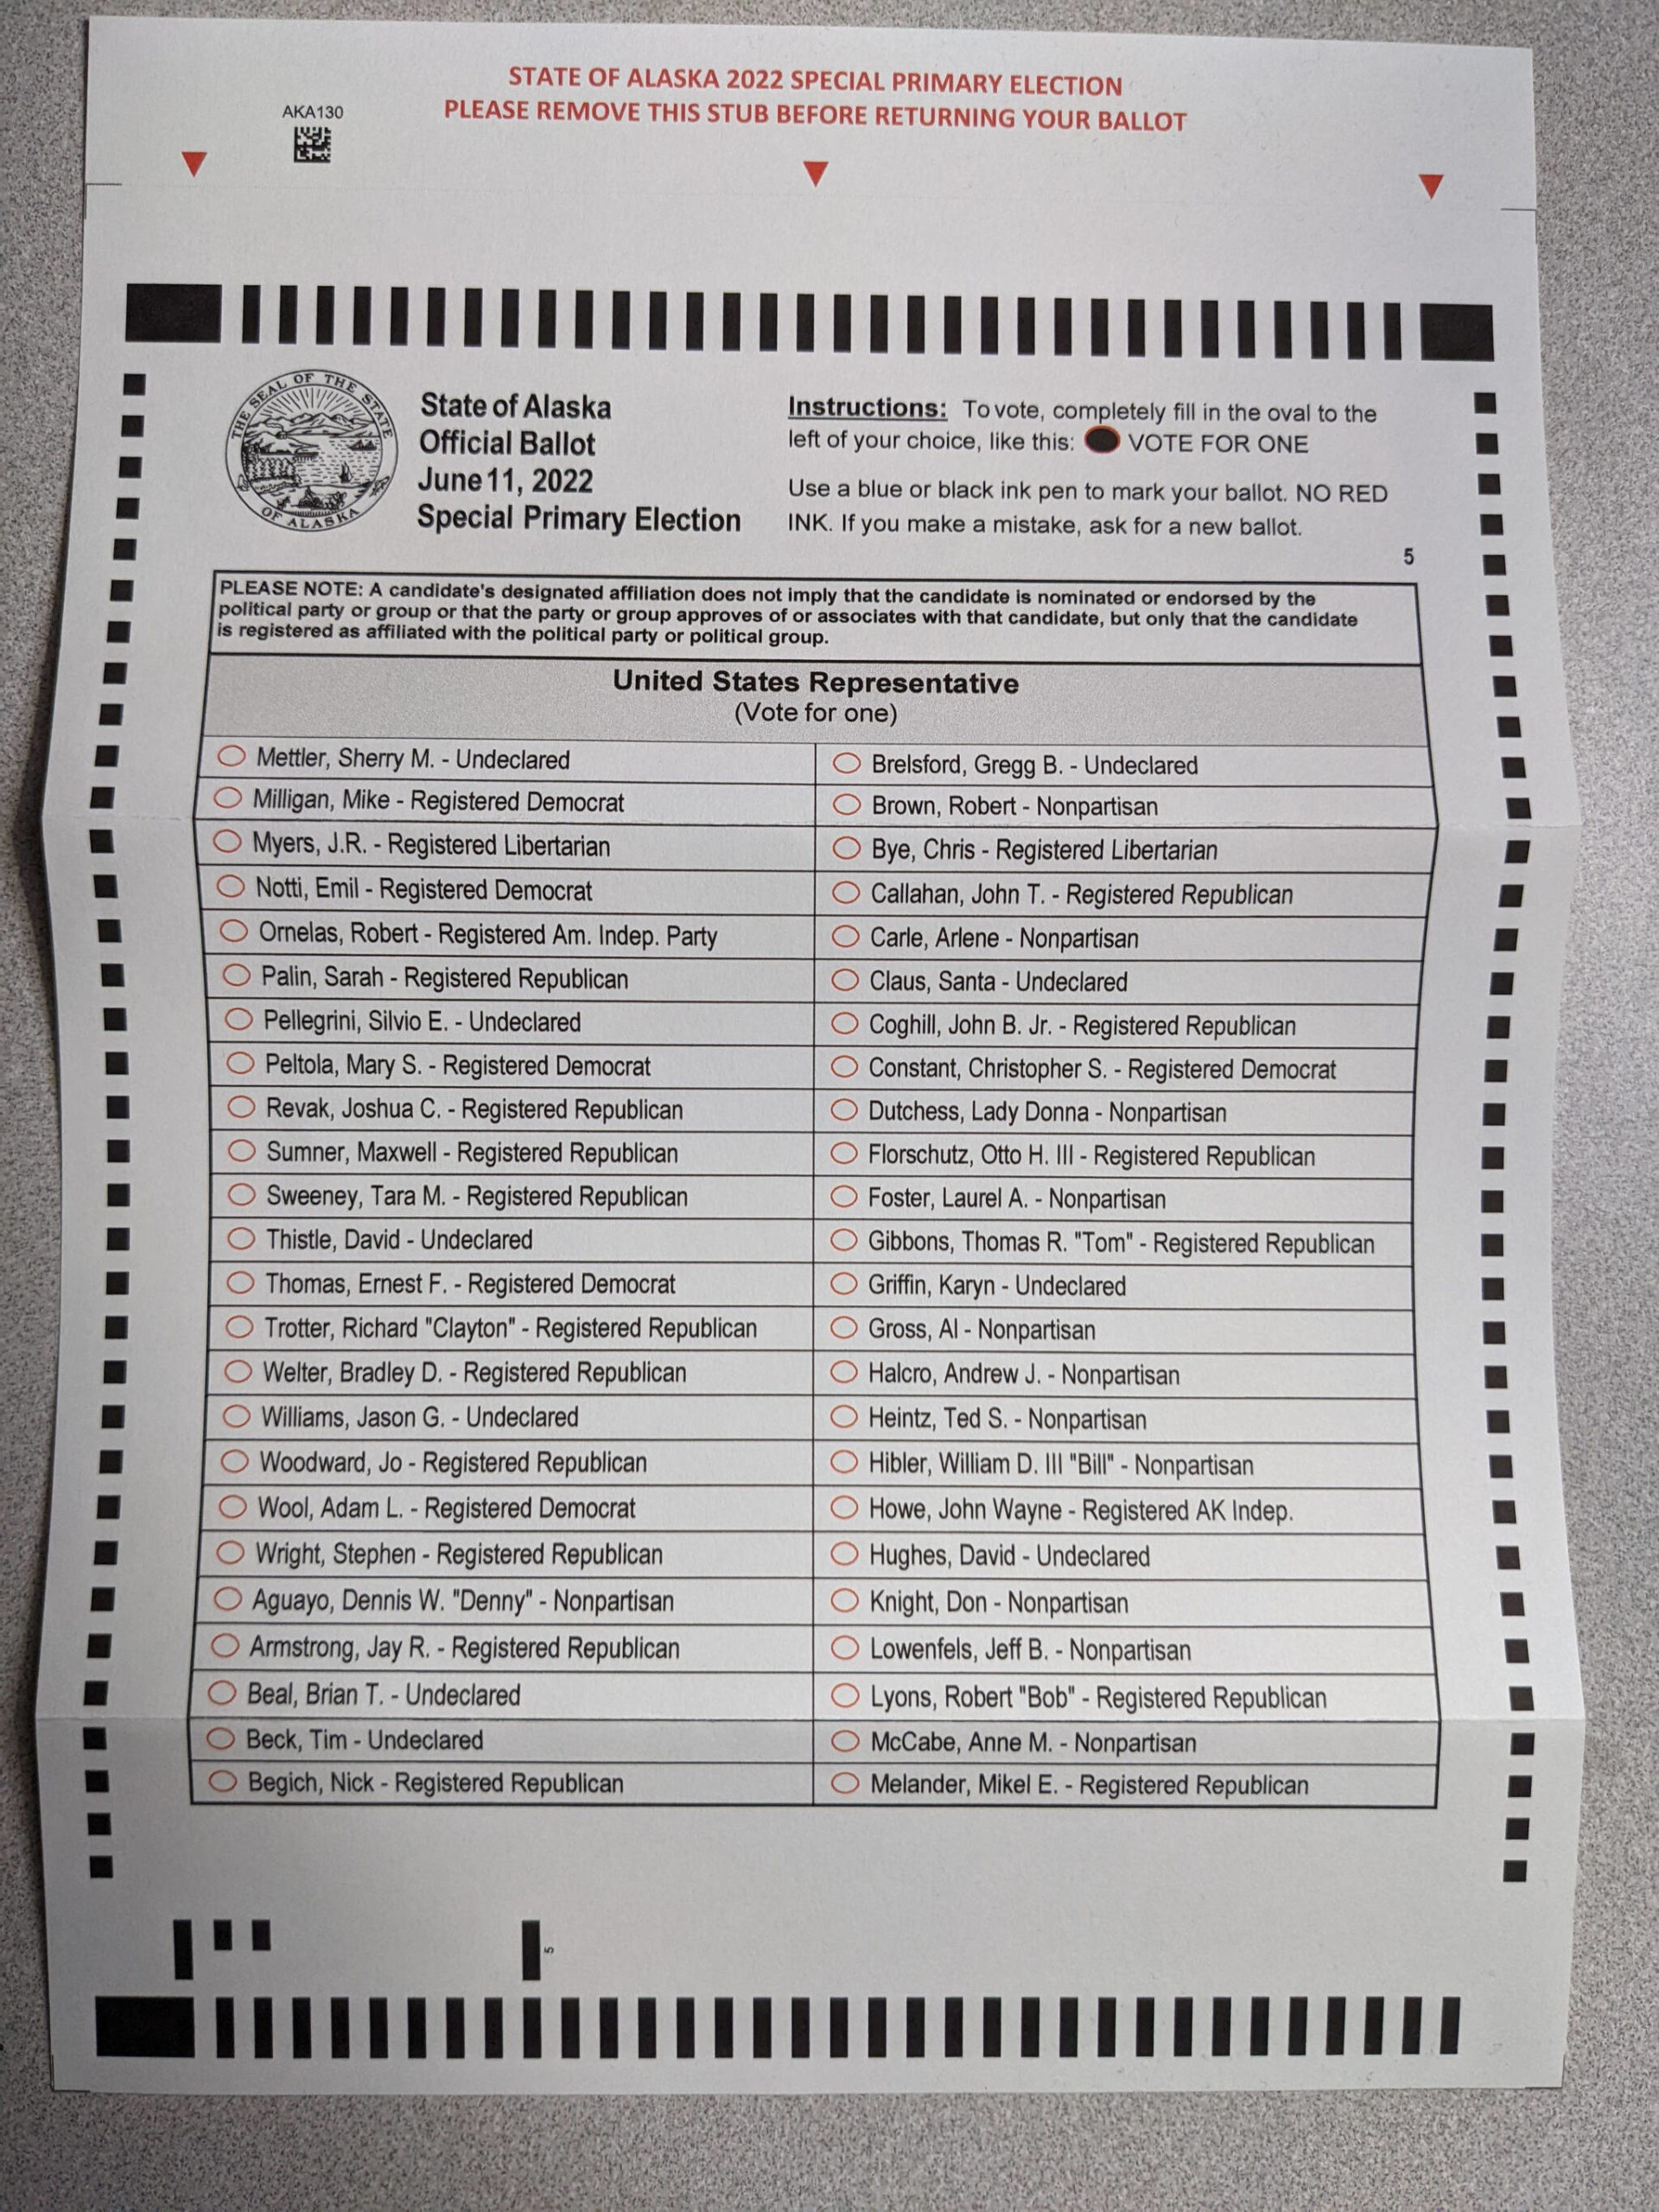 A copy of the State of Alaska Official Ballot for the June 11, 2022, Special Primary Election is photographed on May 2, 2022. (Peninsula Clarion staff)